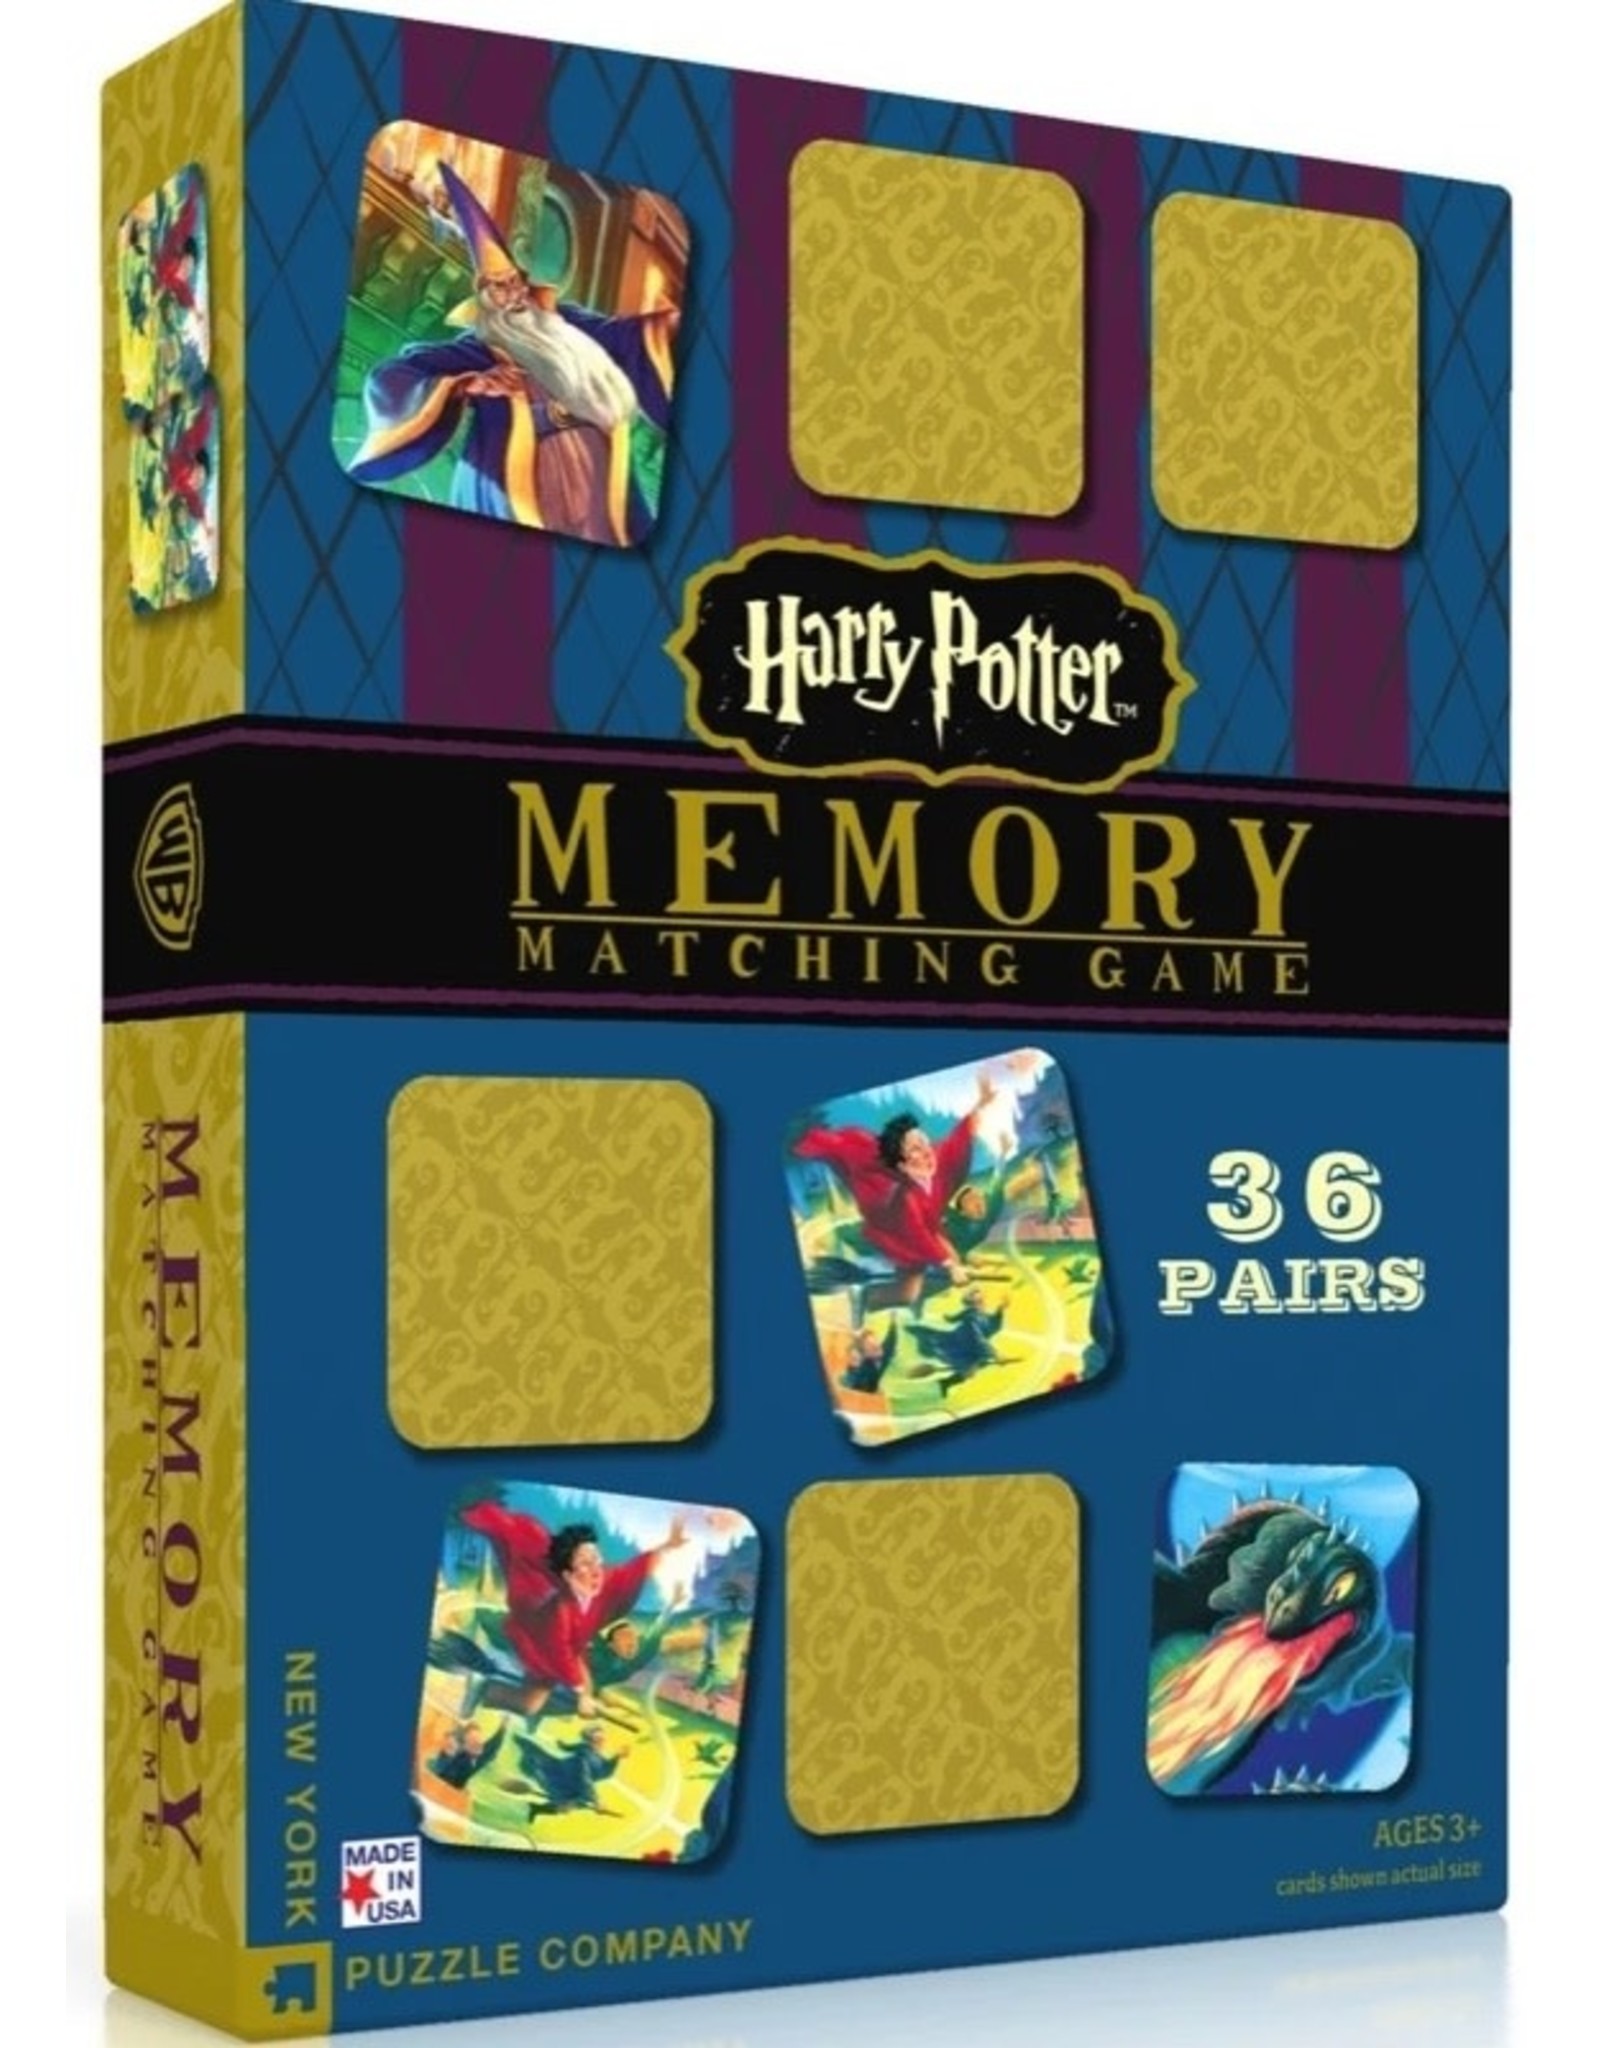 Harry Potter Harry Potter Memory Matching Game